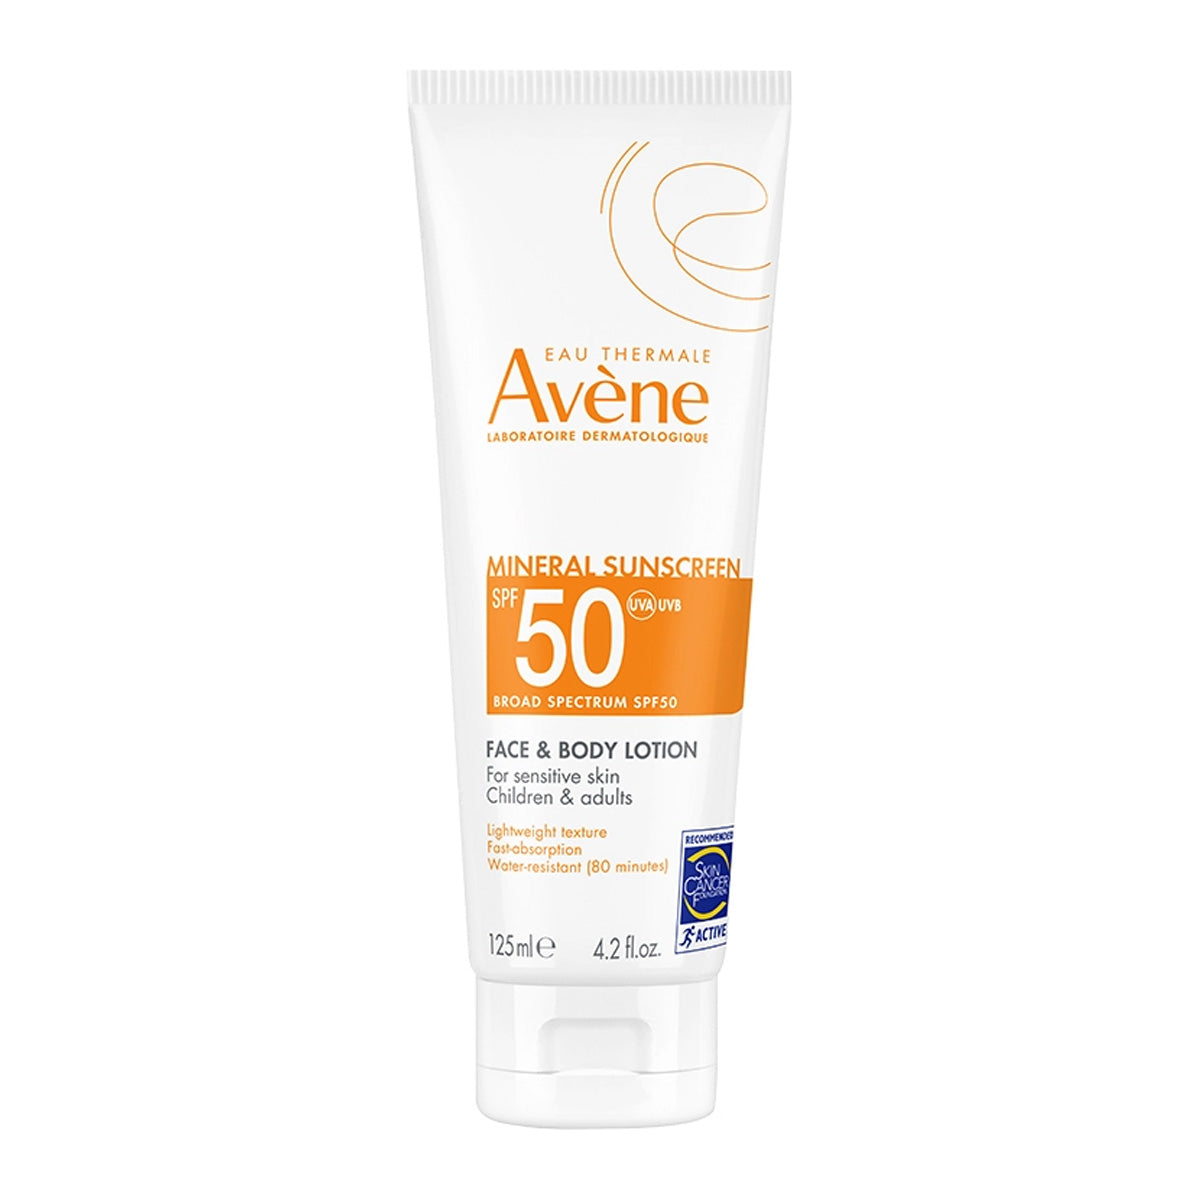 Mineral Sunscreen Face & Body Lotion SPF 50